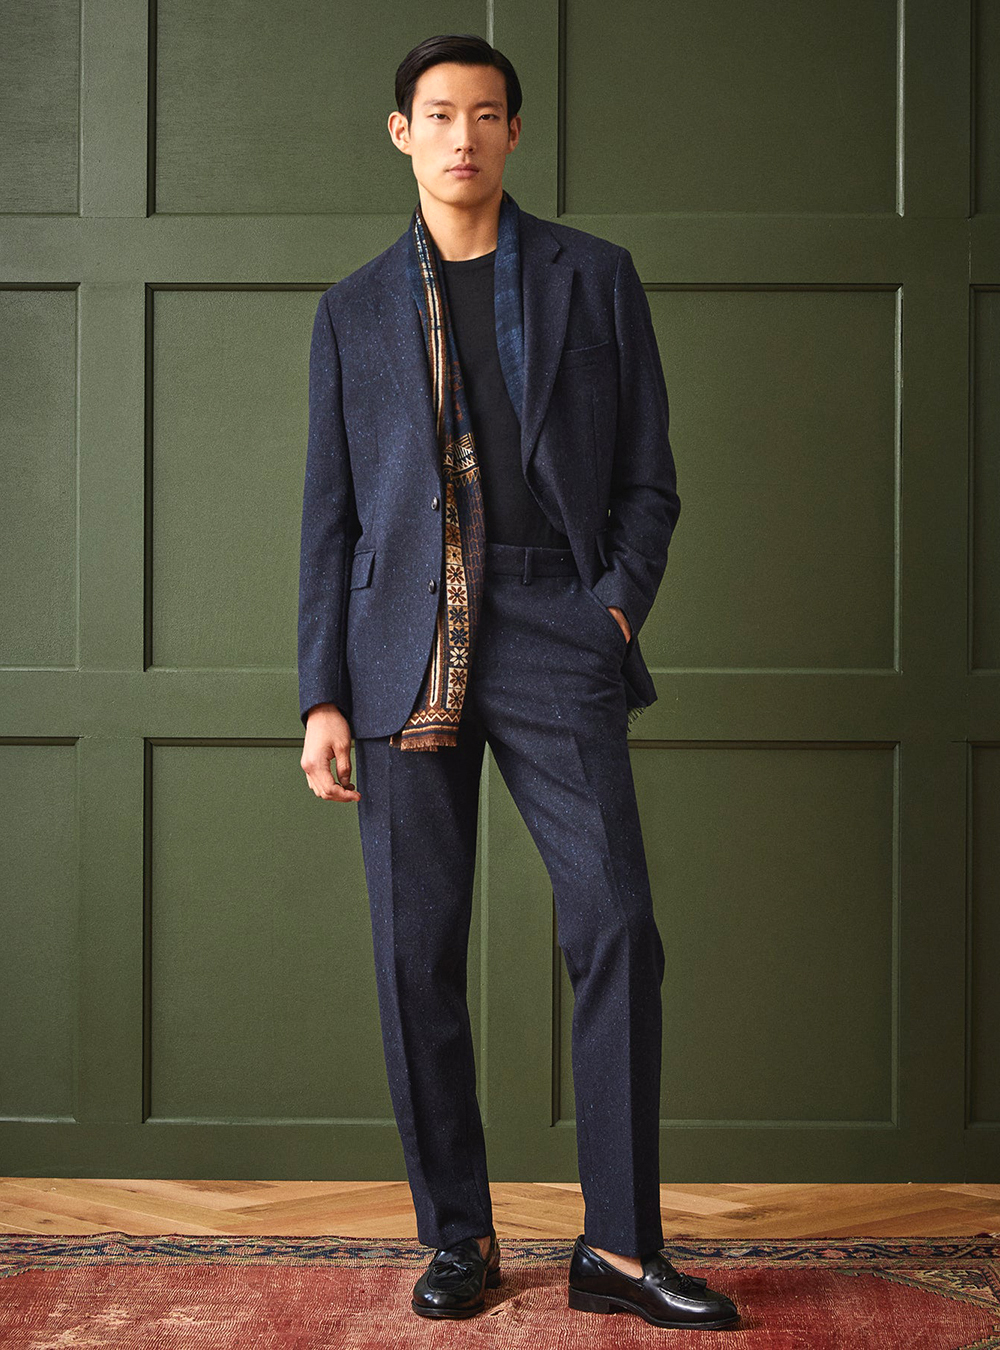 navy blue wool suit, black t-shirt, brown scarf and black loafers